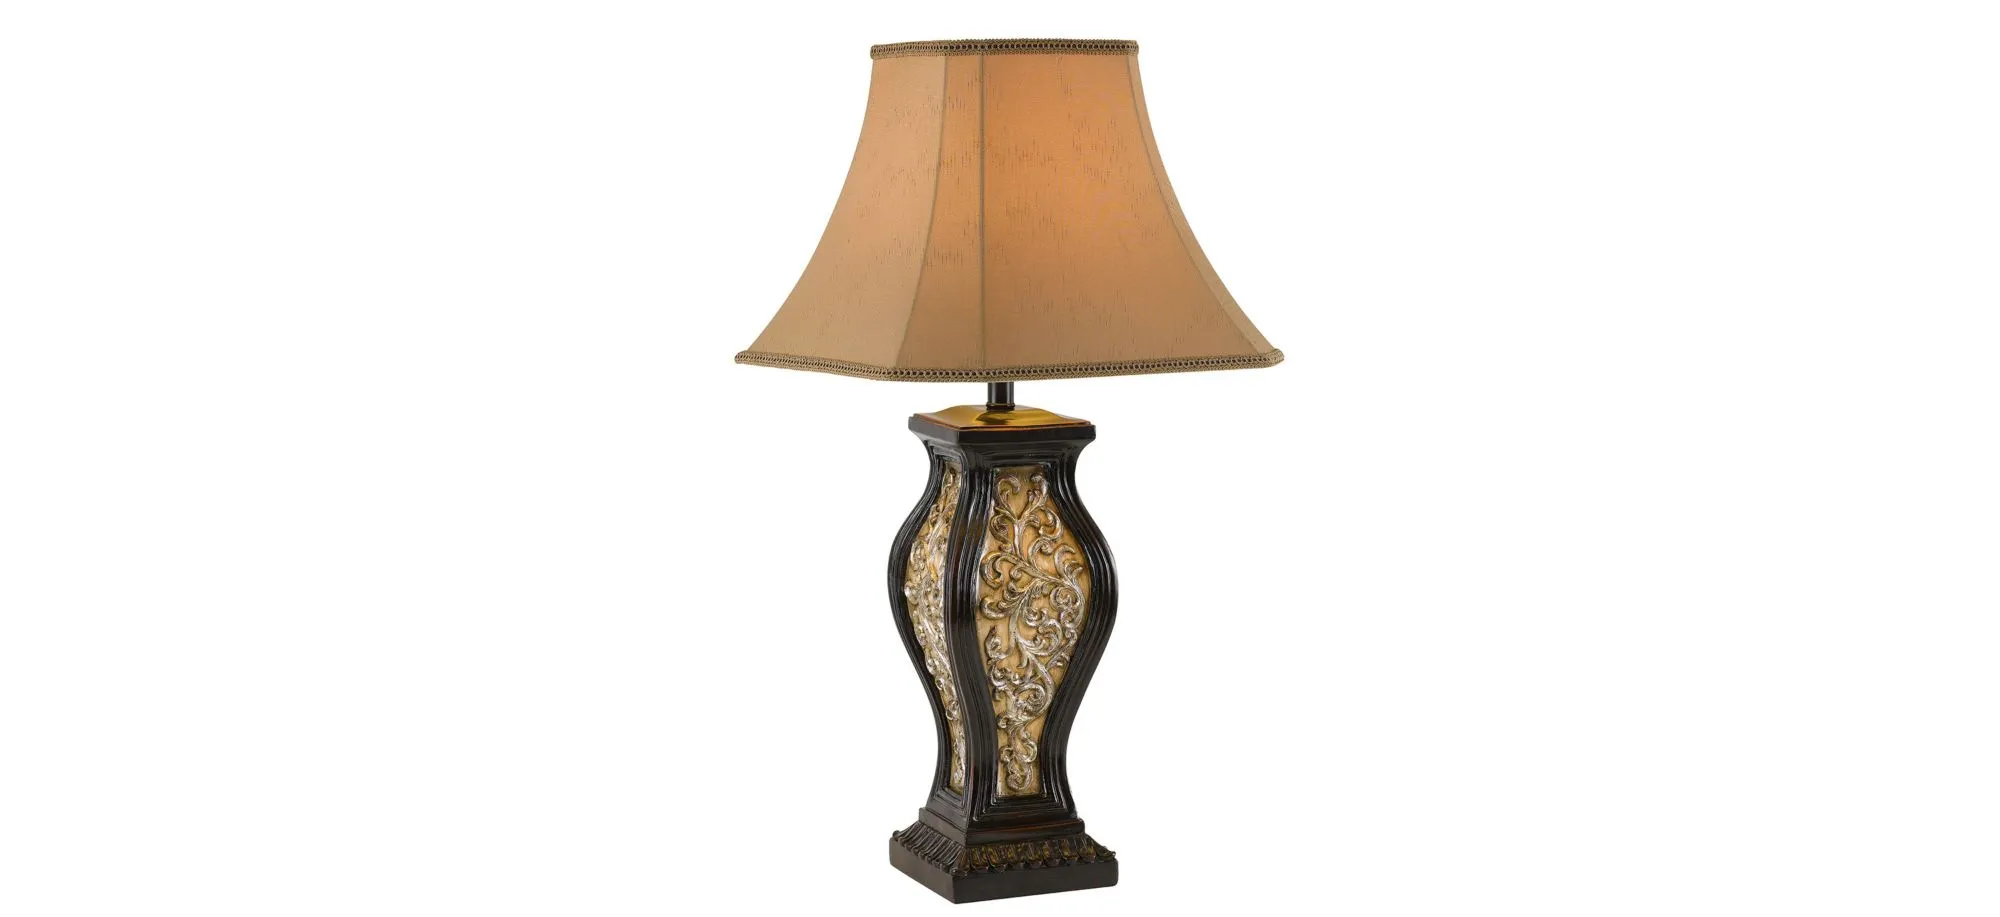 Lacey Table Lamp in Beige / Brown by Bellanest